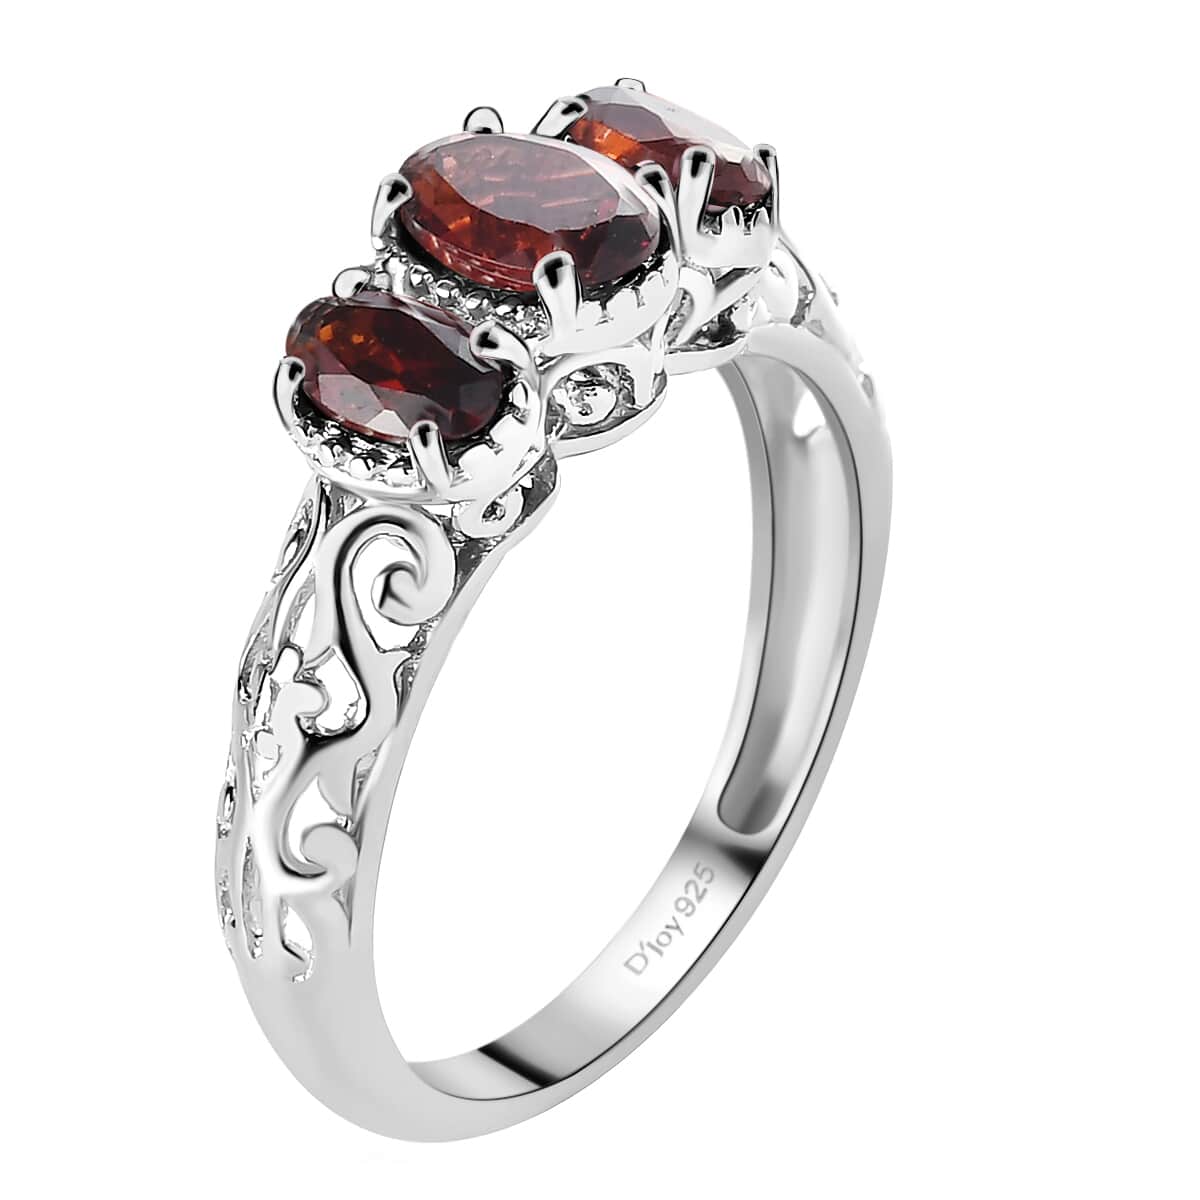 Garnet Ring, 3 Stone Garnet Ring, Trilogy Ring, Sterling Silver Ring, Birthstone Jewelry, Mozambique Garnet 3 Stone Ring 1.15 ctw (Size 6.0) image number 5